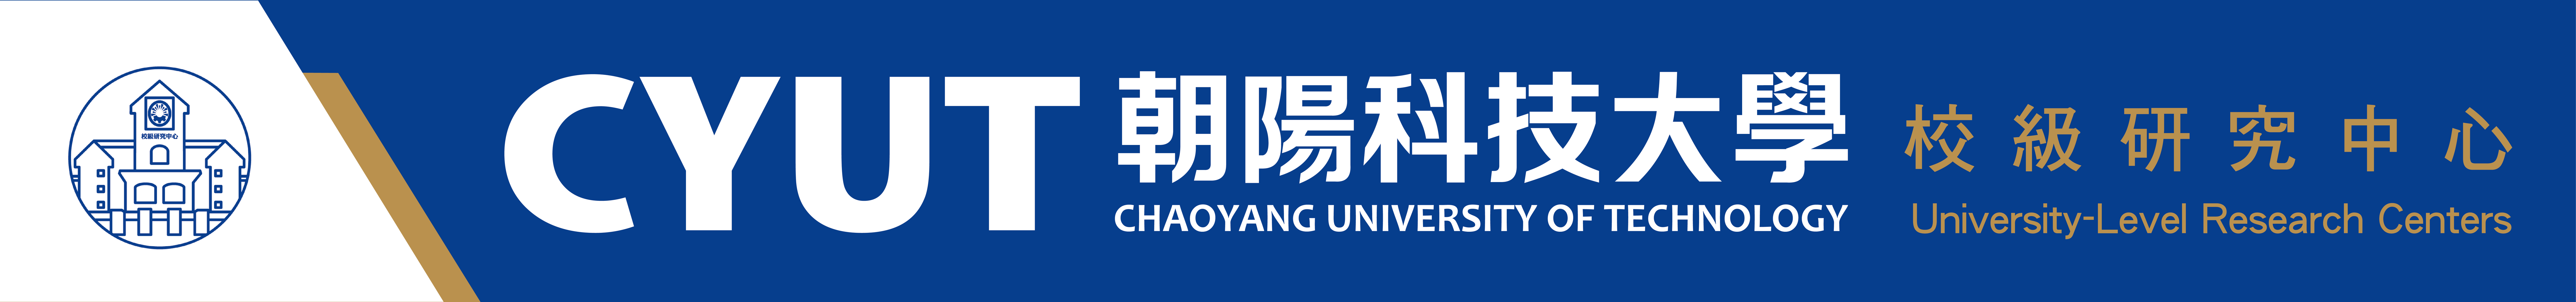 University-Level Research Centers of CYUT